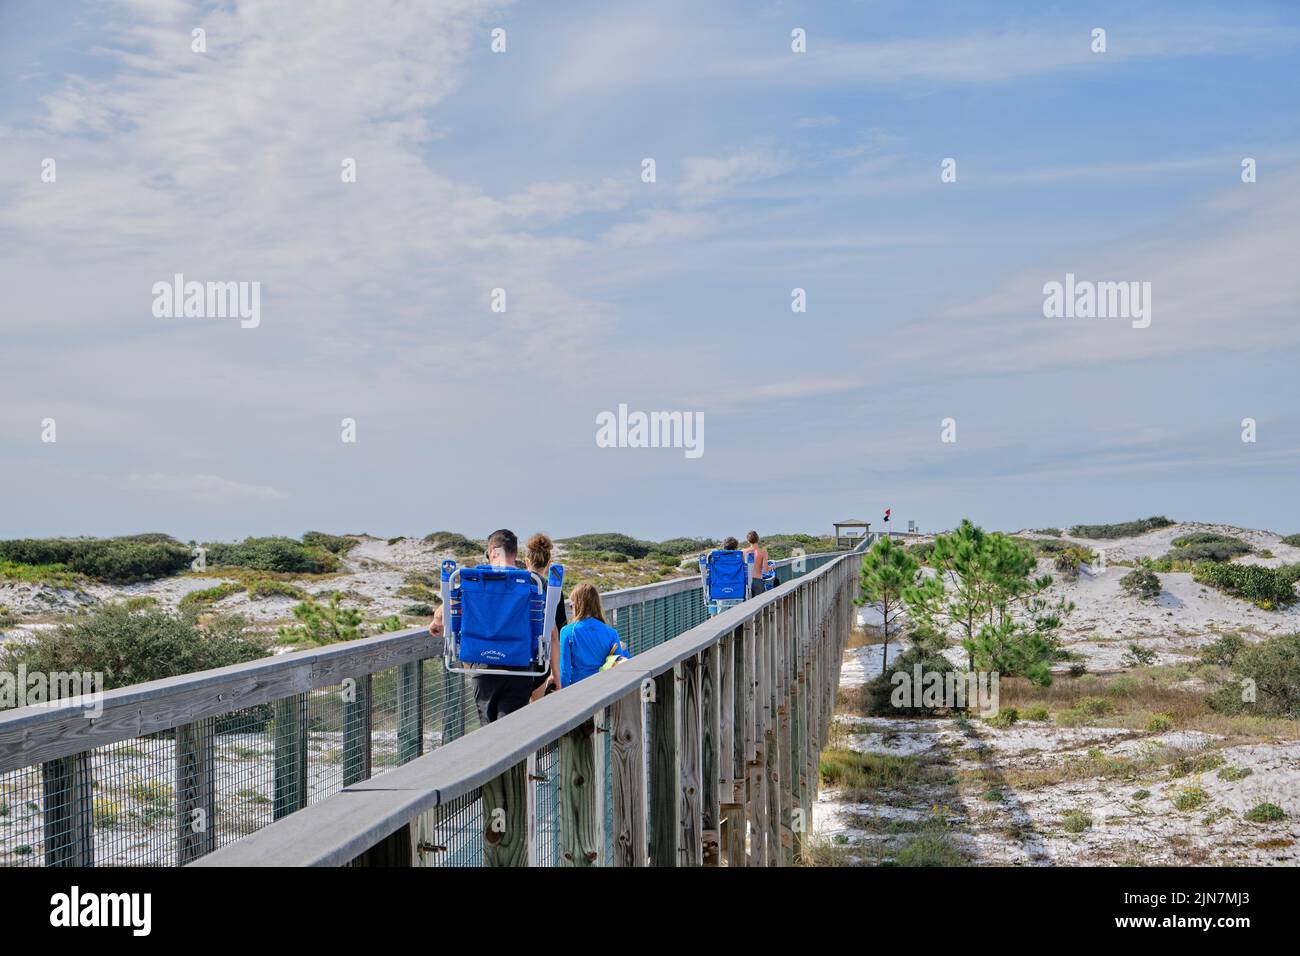 Family on vacation walk along a wooden walkway to the beach in Deer Lake State Park, in the Florida panhandle on the Florida Gulf Coast, USA. Stock Photo